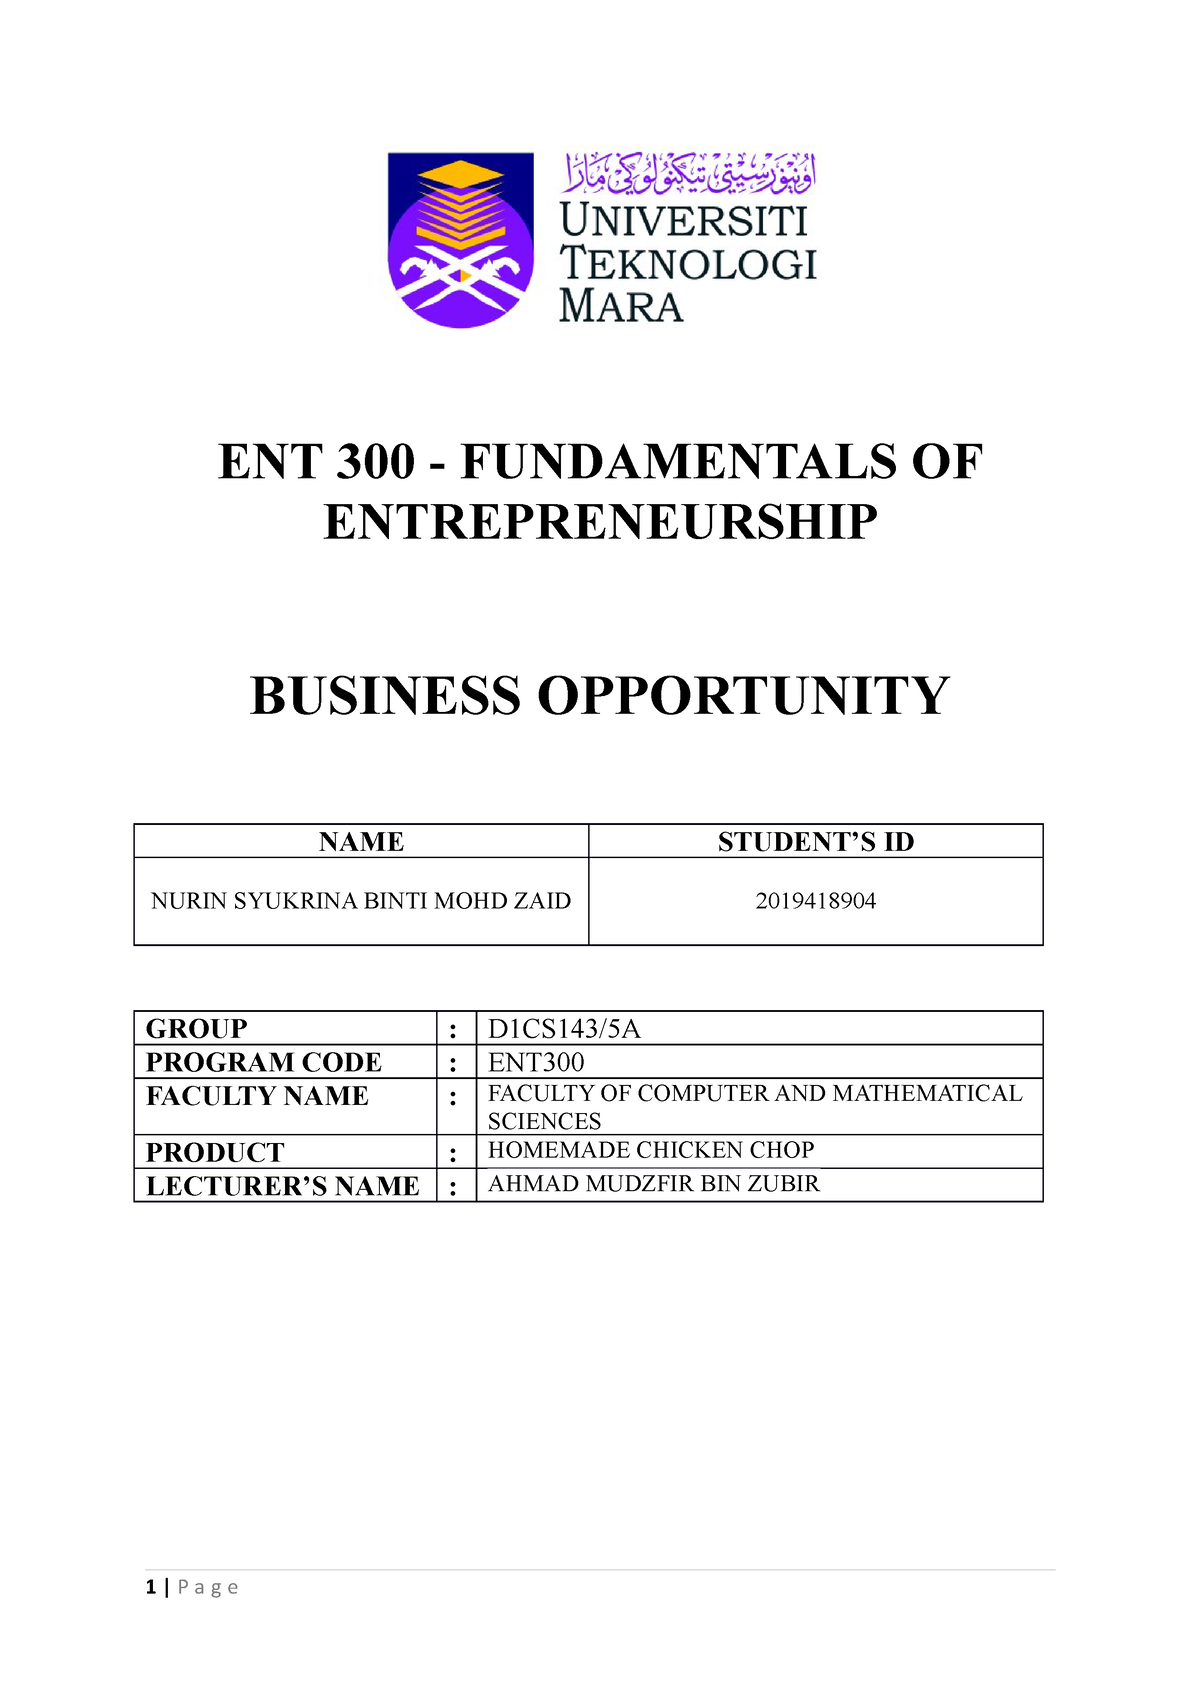 business opportunity ent300 individual assignment scribd